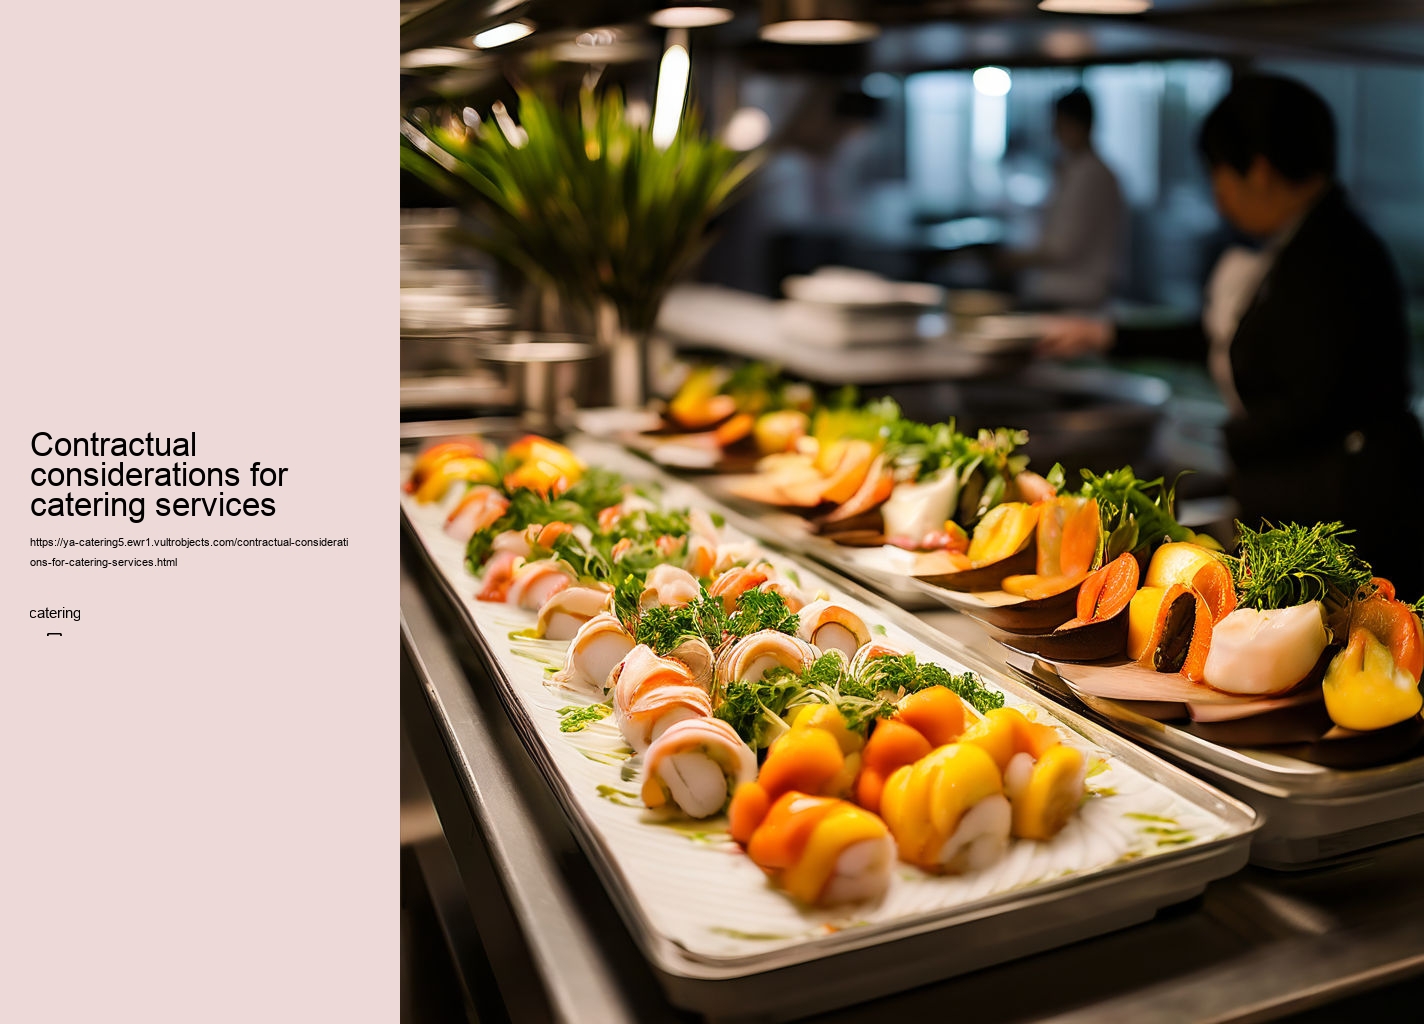 Contractual considerations for catering services